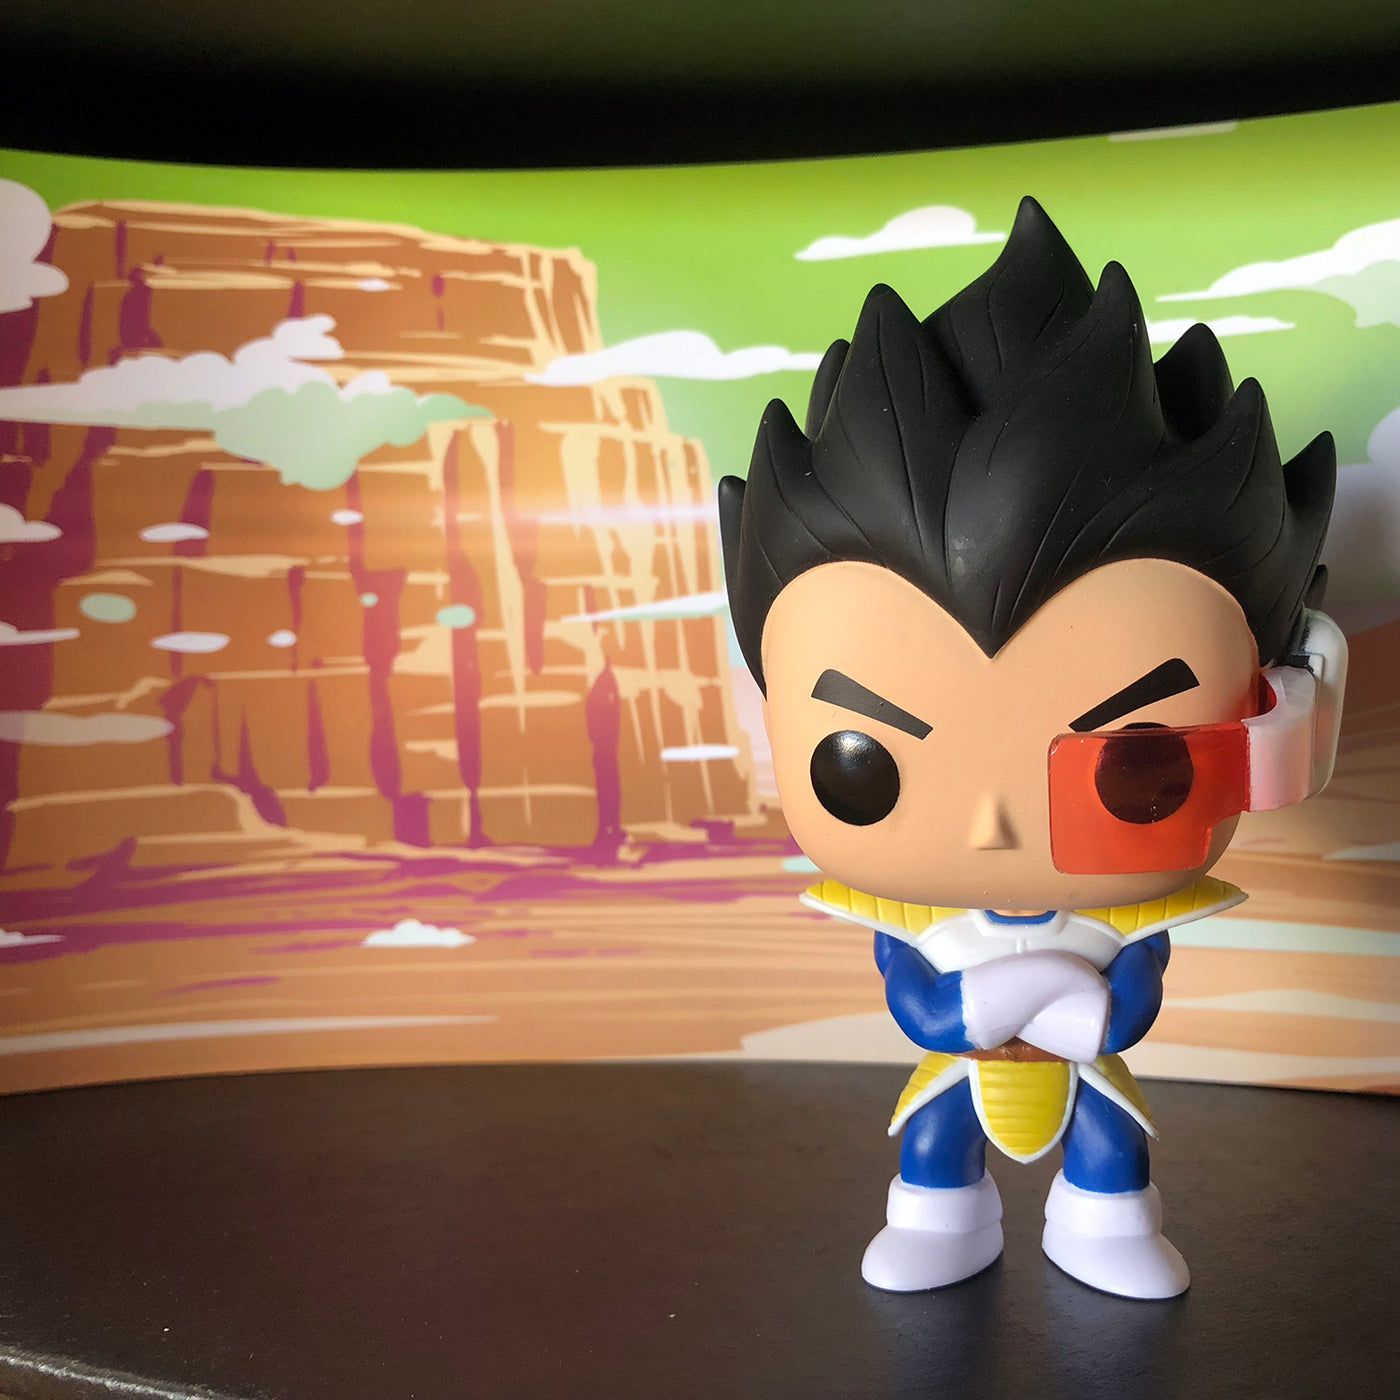 **BACK IN STOCK MAY 13TH** DRAGON BALL - Display Case for Funko Pops with 3 Backdrop Inserts, Corrugated Cardboard - Display Geek